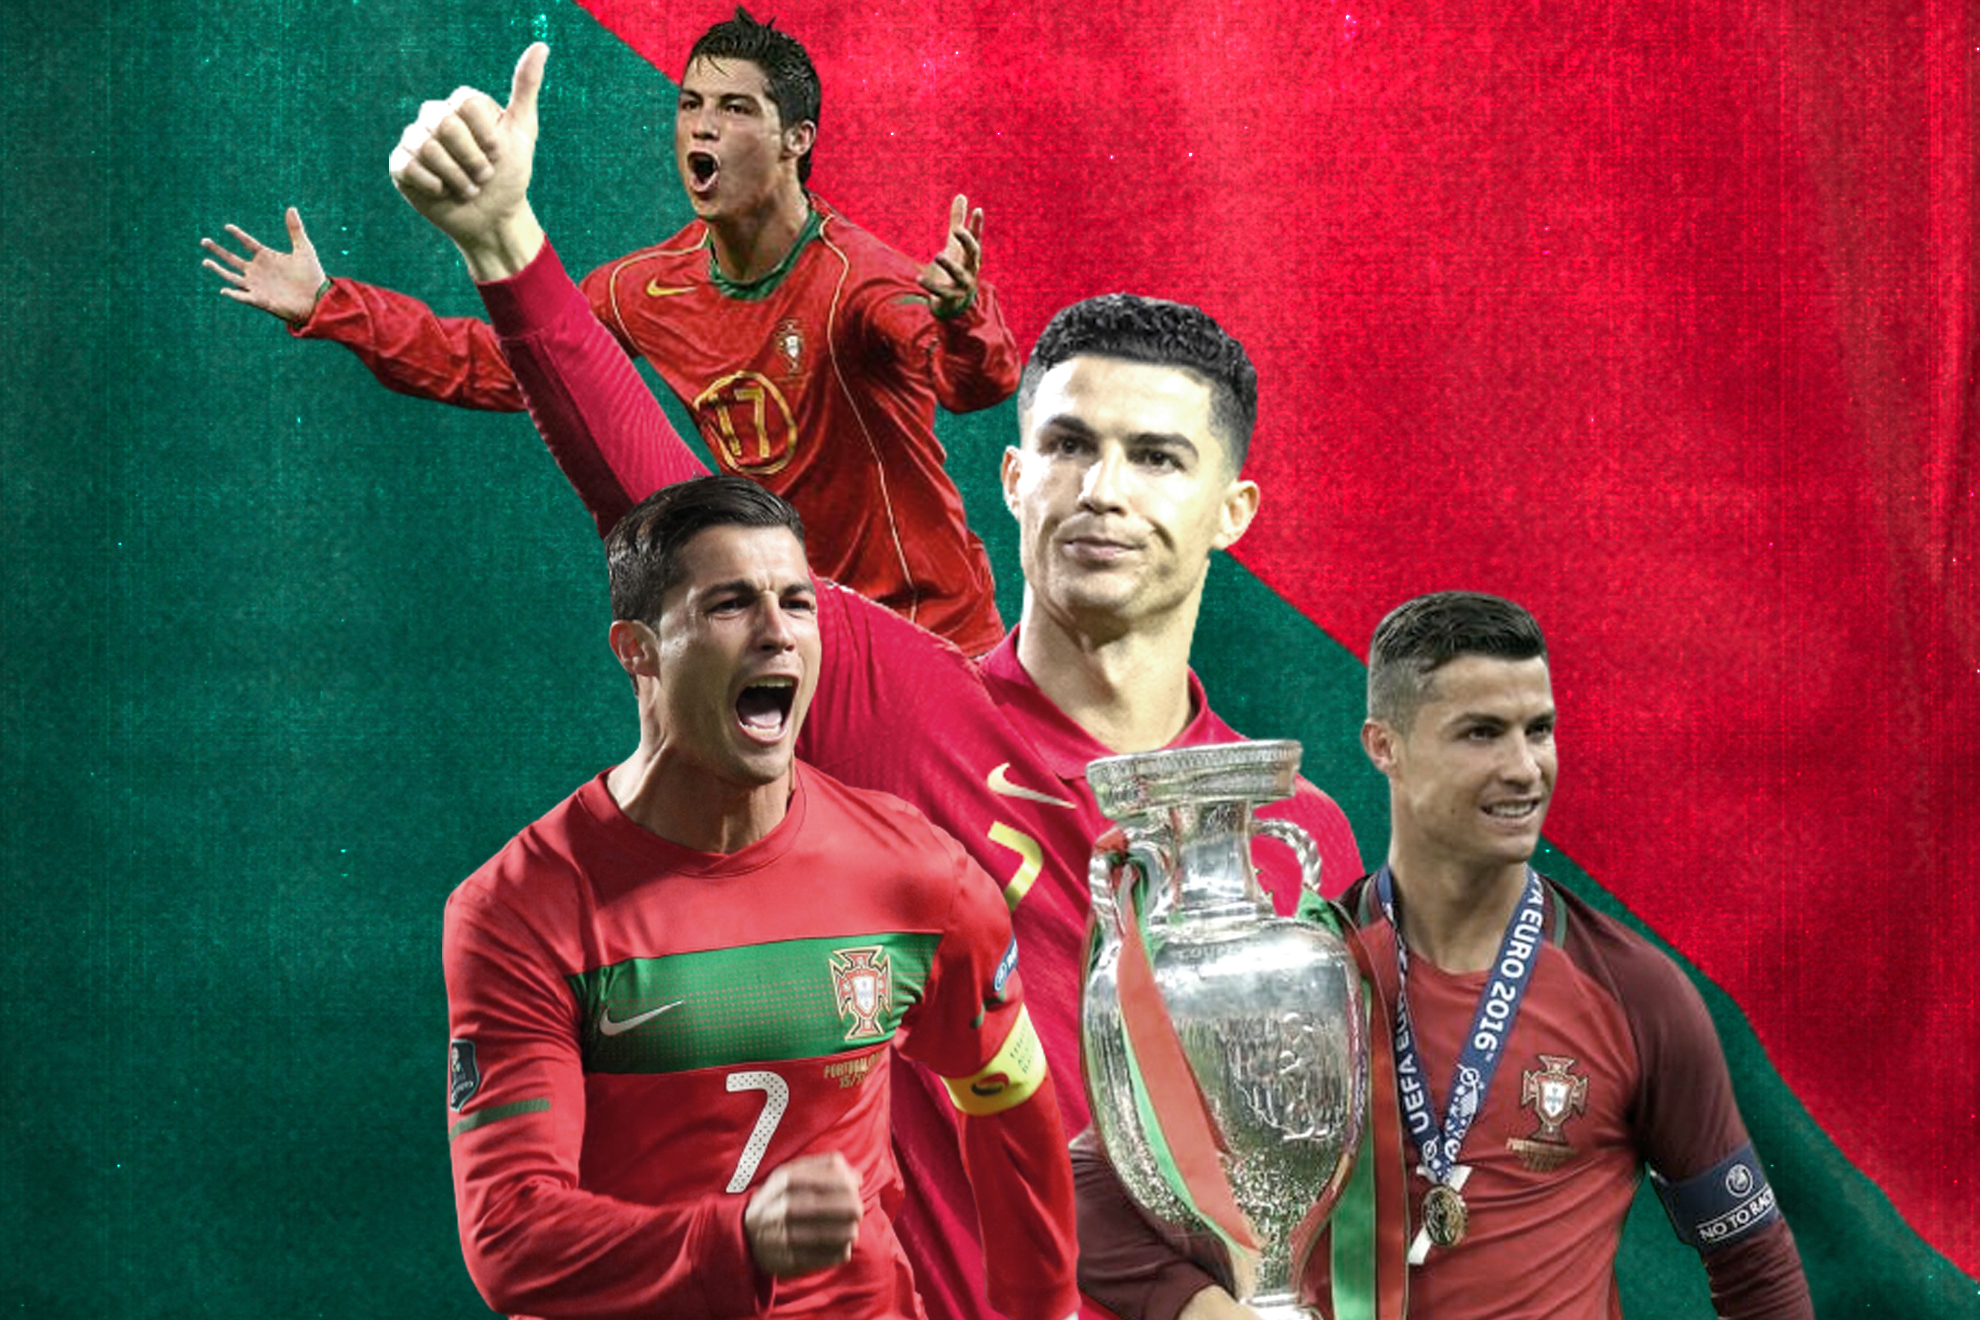 Cristiano Ronaldo's latest record: The player with the most international caps in history